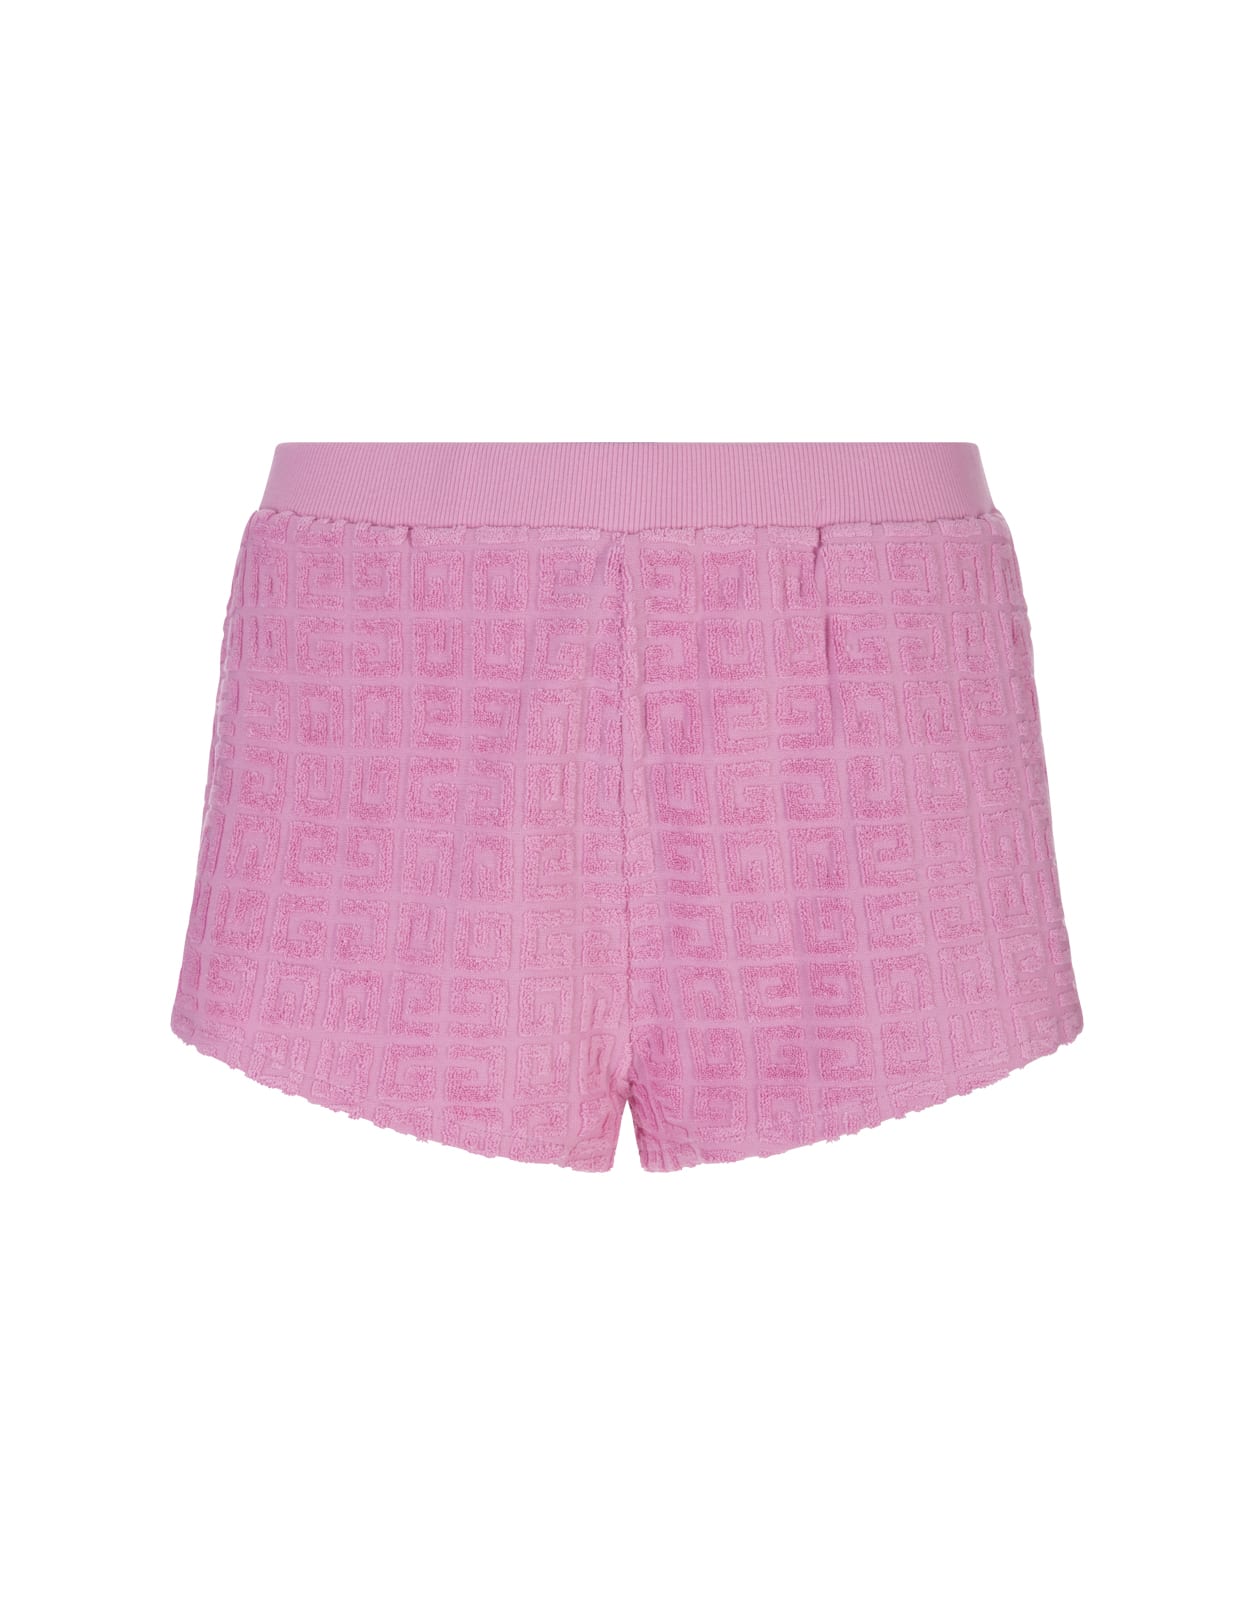 GIVENCHY MINI SHORTS IN PINK 4G JACQUARD TERRY